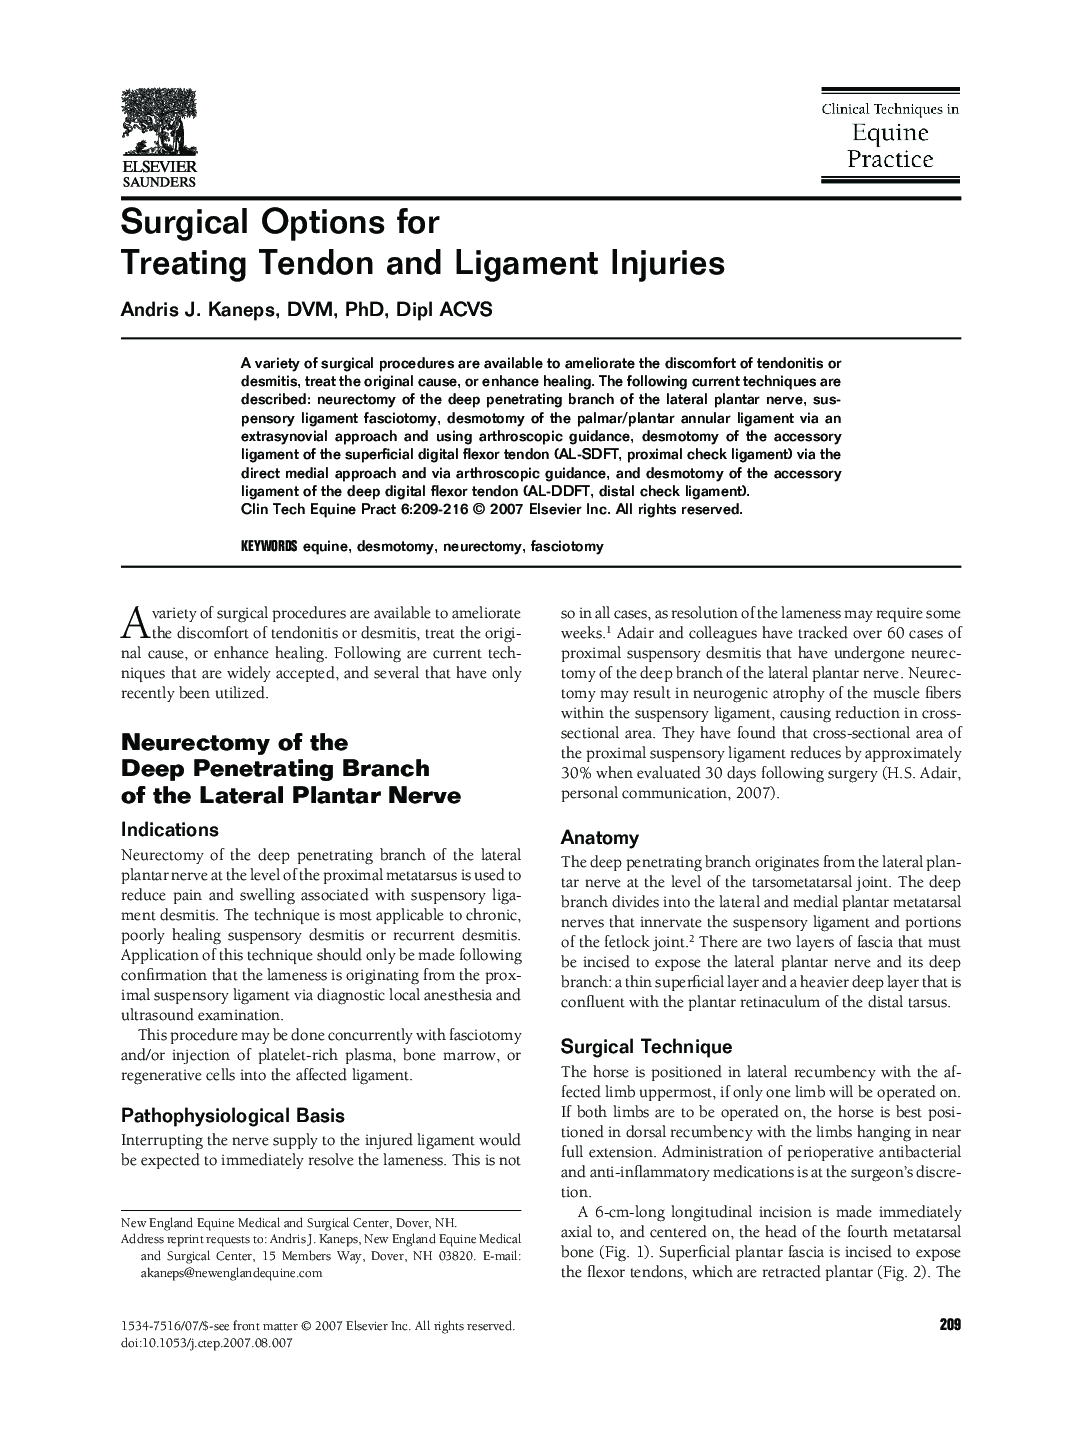 Surgical Options for Treating Tendon and Ligament Injuries